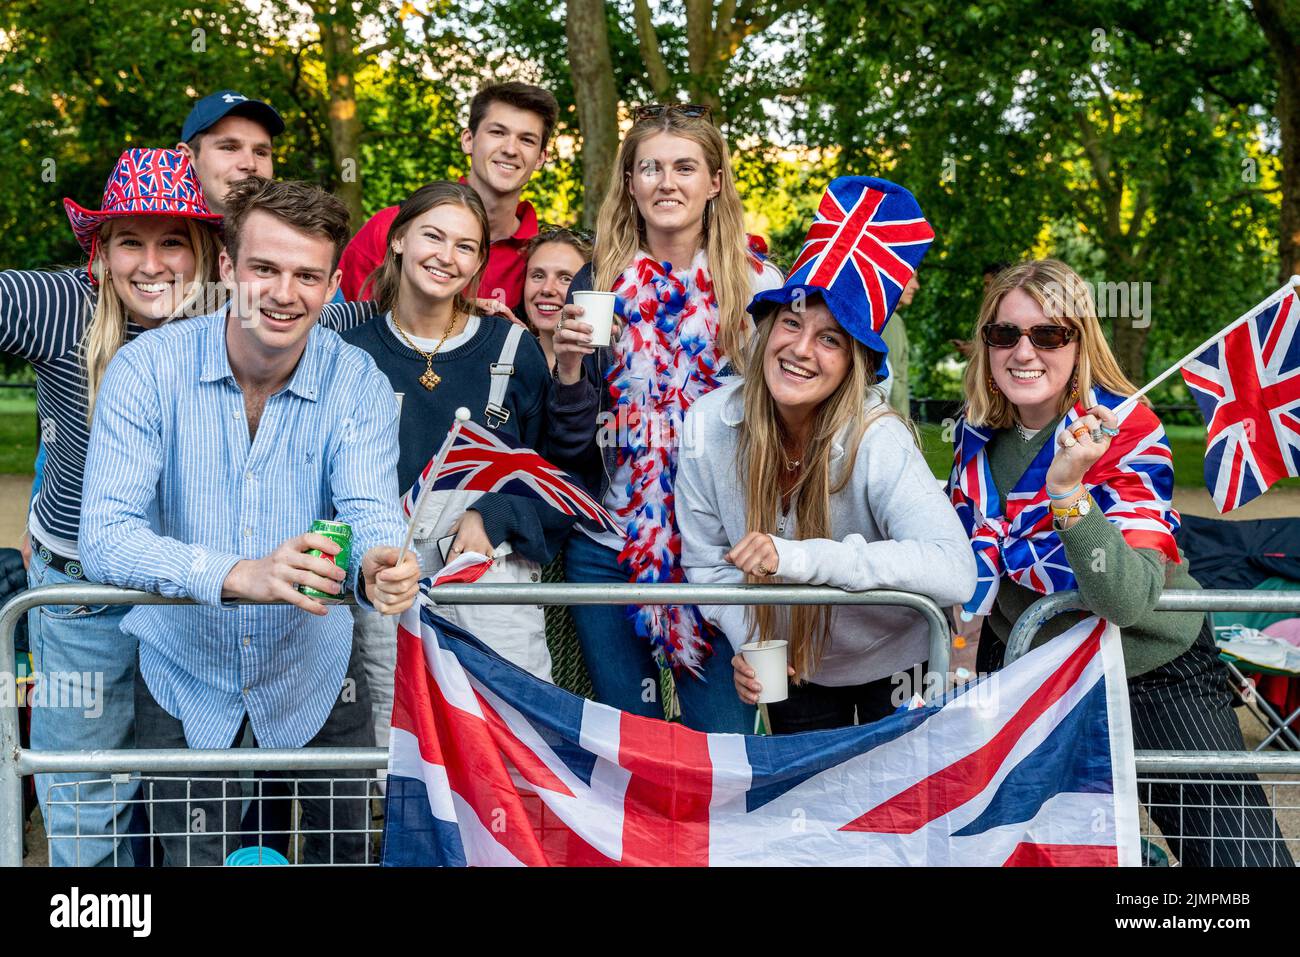 A Group Of Young British People Camp Overnight On The Mall For A Good Viewing Spot To Watch The Queen's Birthday Parade, London, UK. Stock Photo